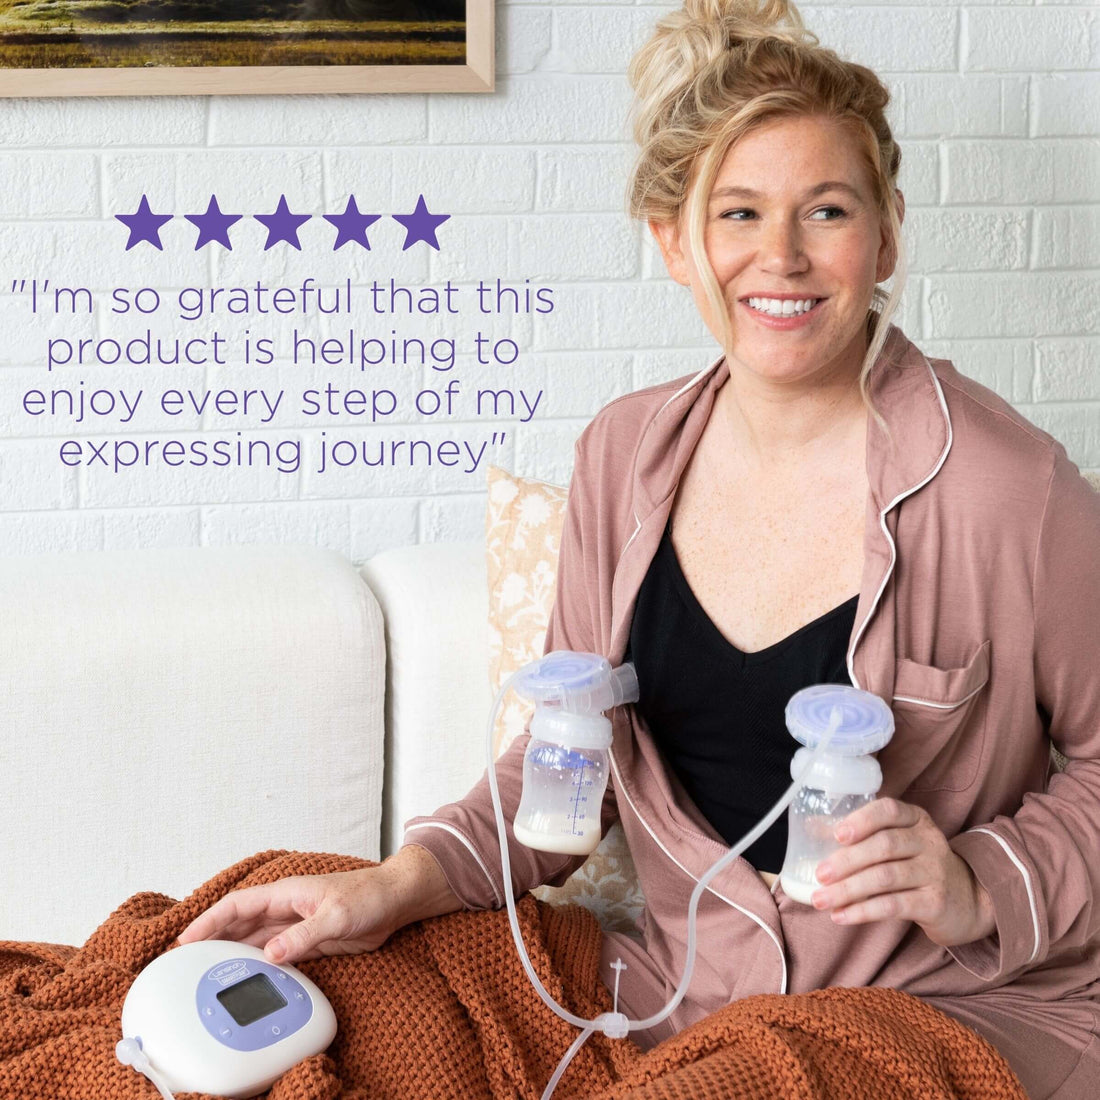 Lansinoh 2-in-1 Double Electric Breast Pump